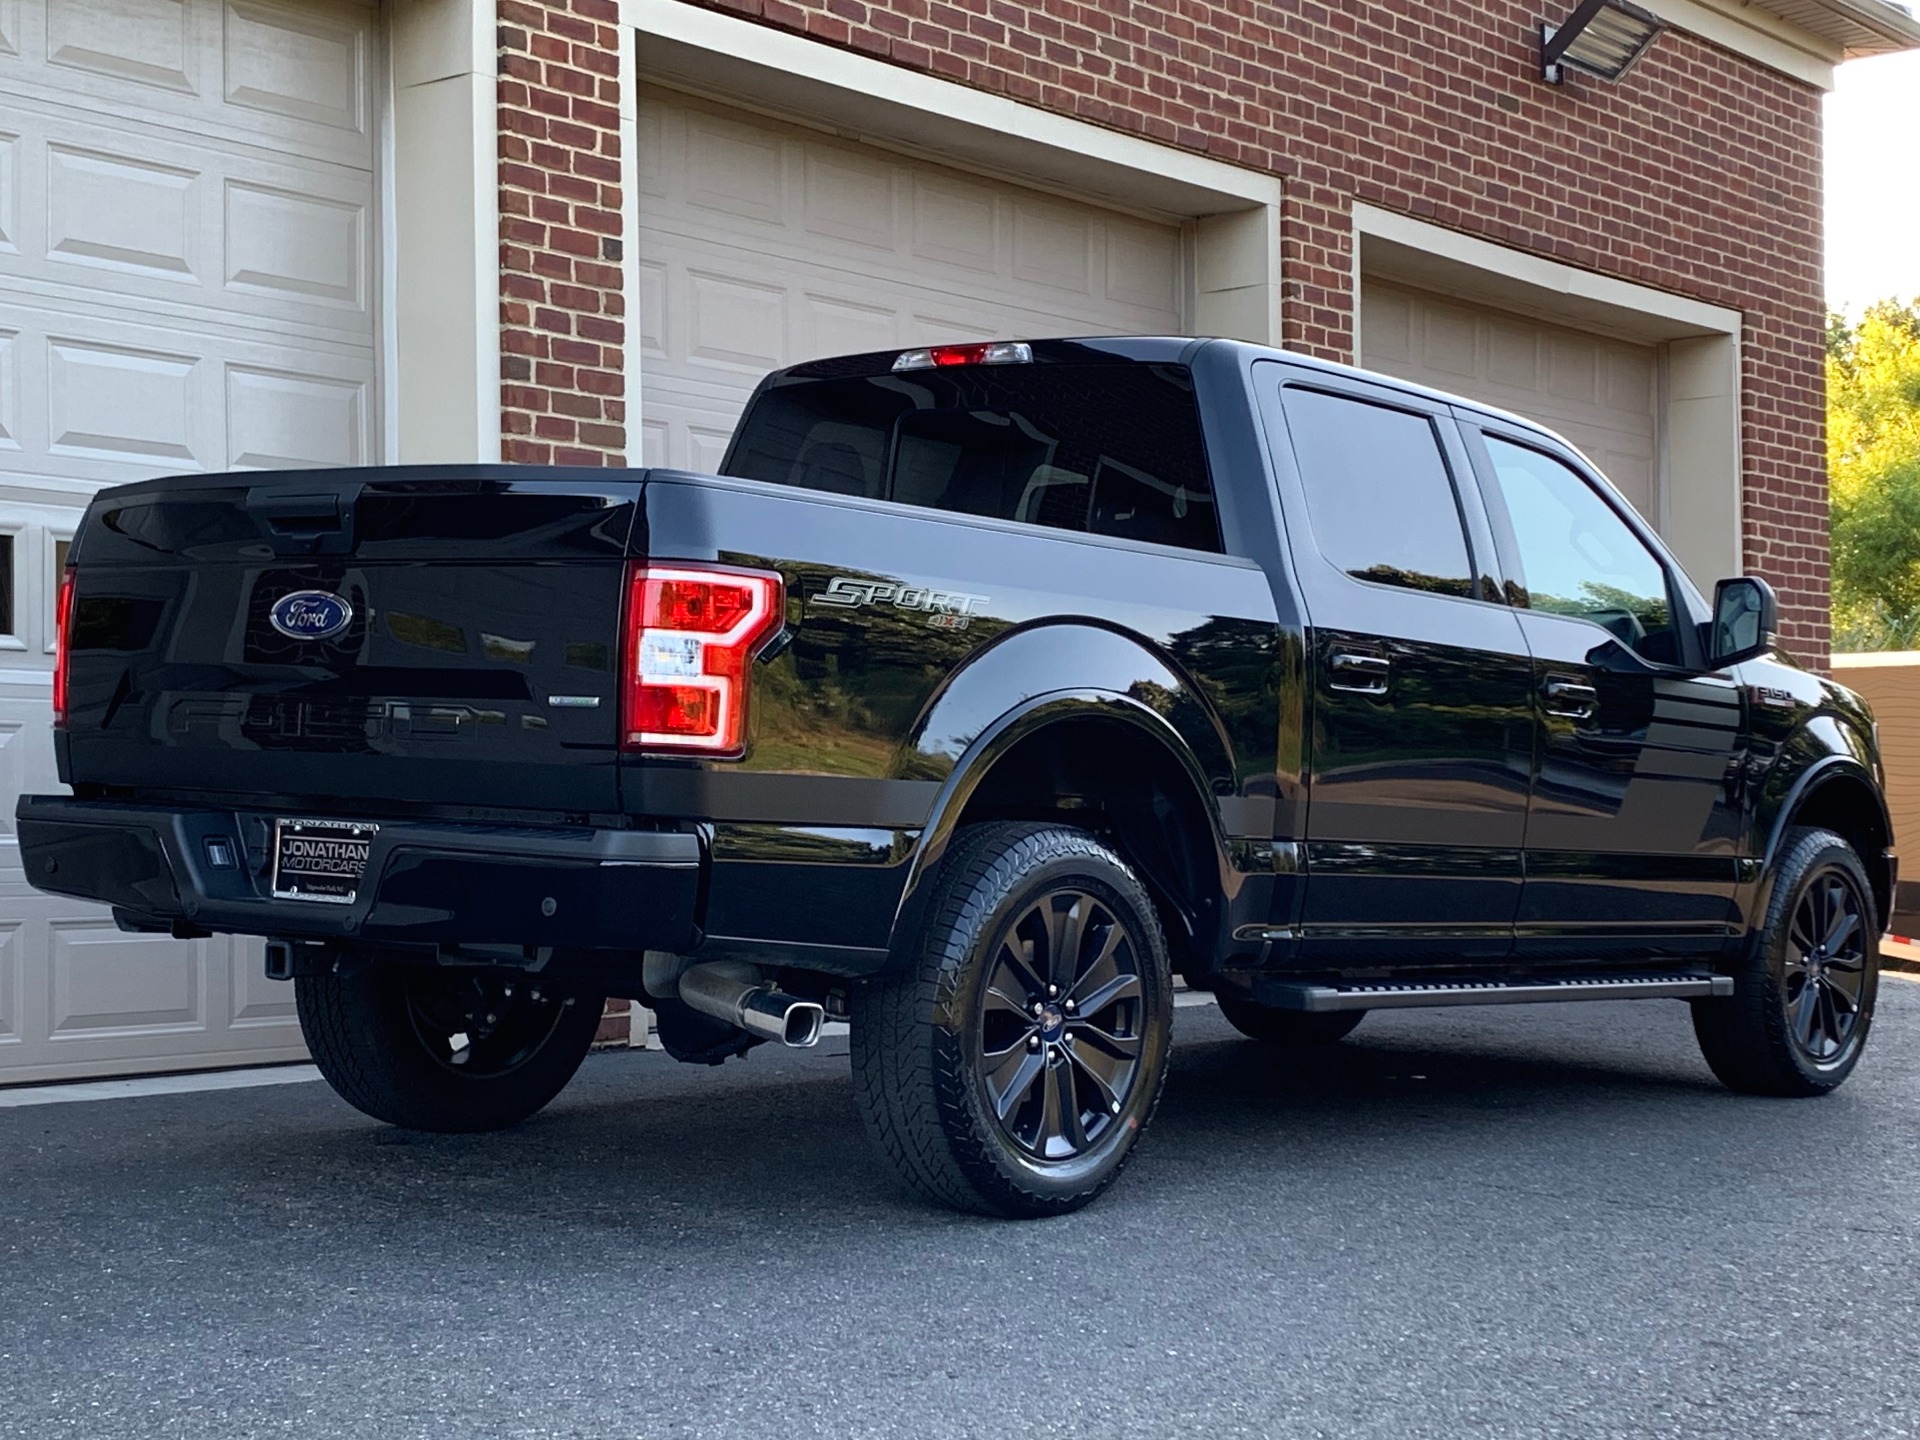 58 Top Images F150 Sport Package 2019 : Bought My First Ever New Truck Yesterday 2019 F150 Xlt Sport 4x4 Came From A 2013 Lariat F150 F150